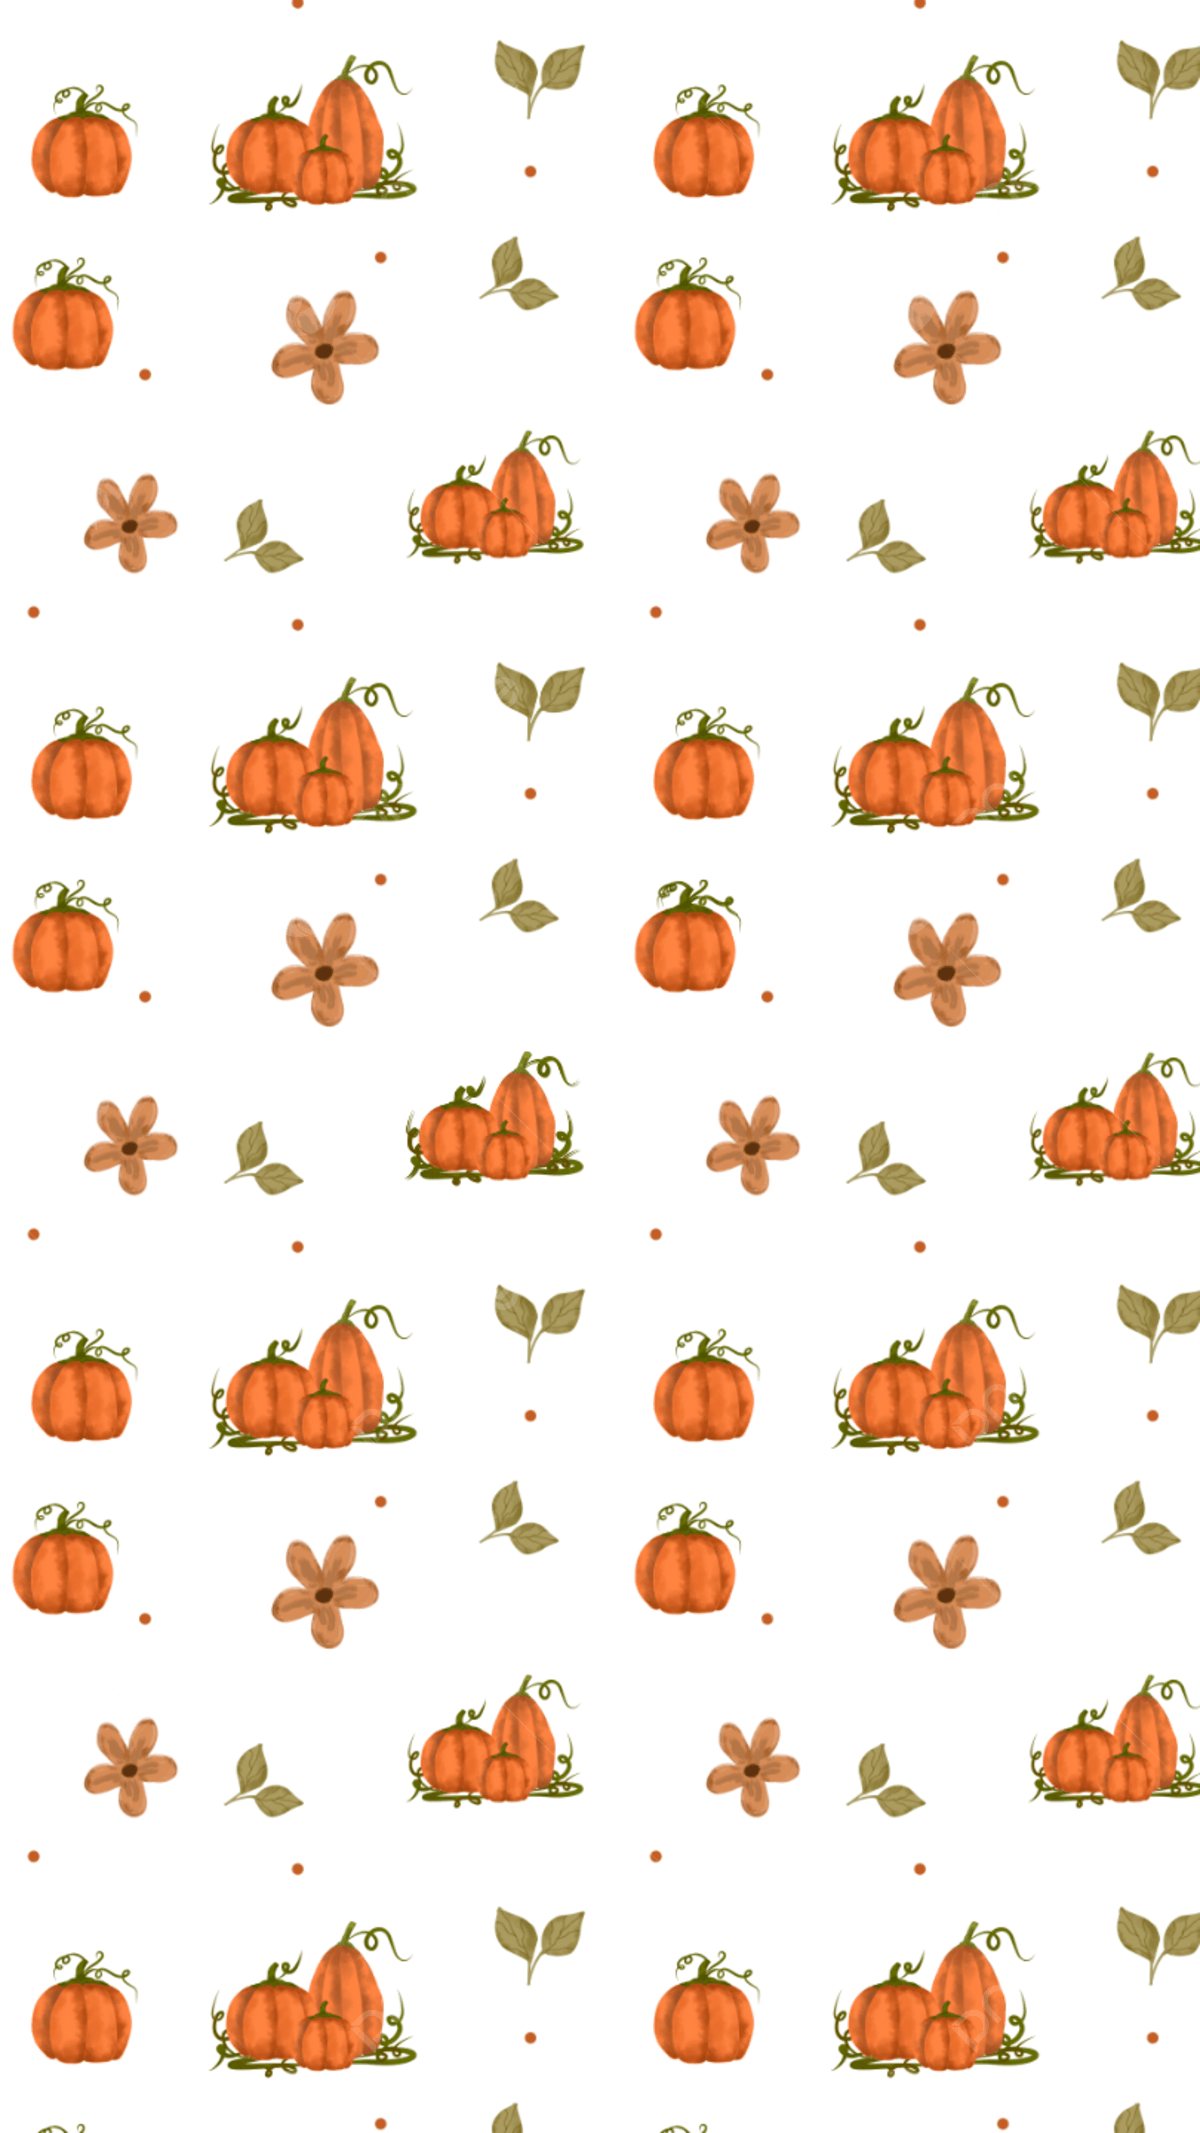 : pumpkin pattern with leaves and flowers on a white background - Pastel orange, cute fall